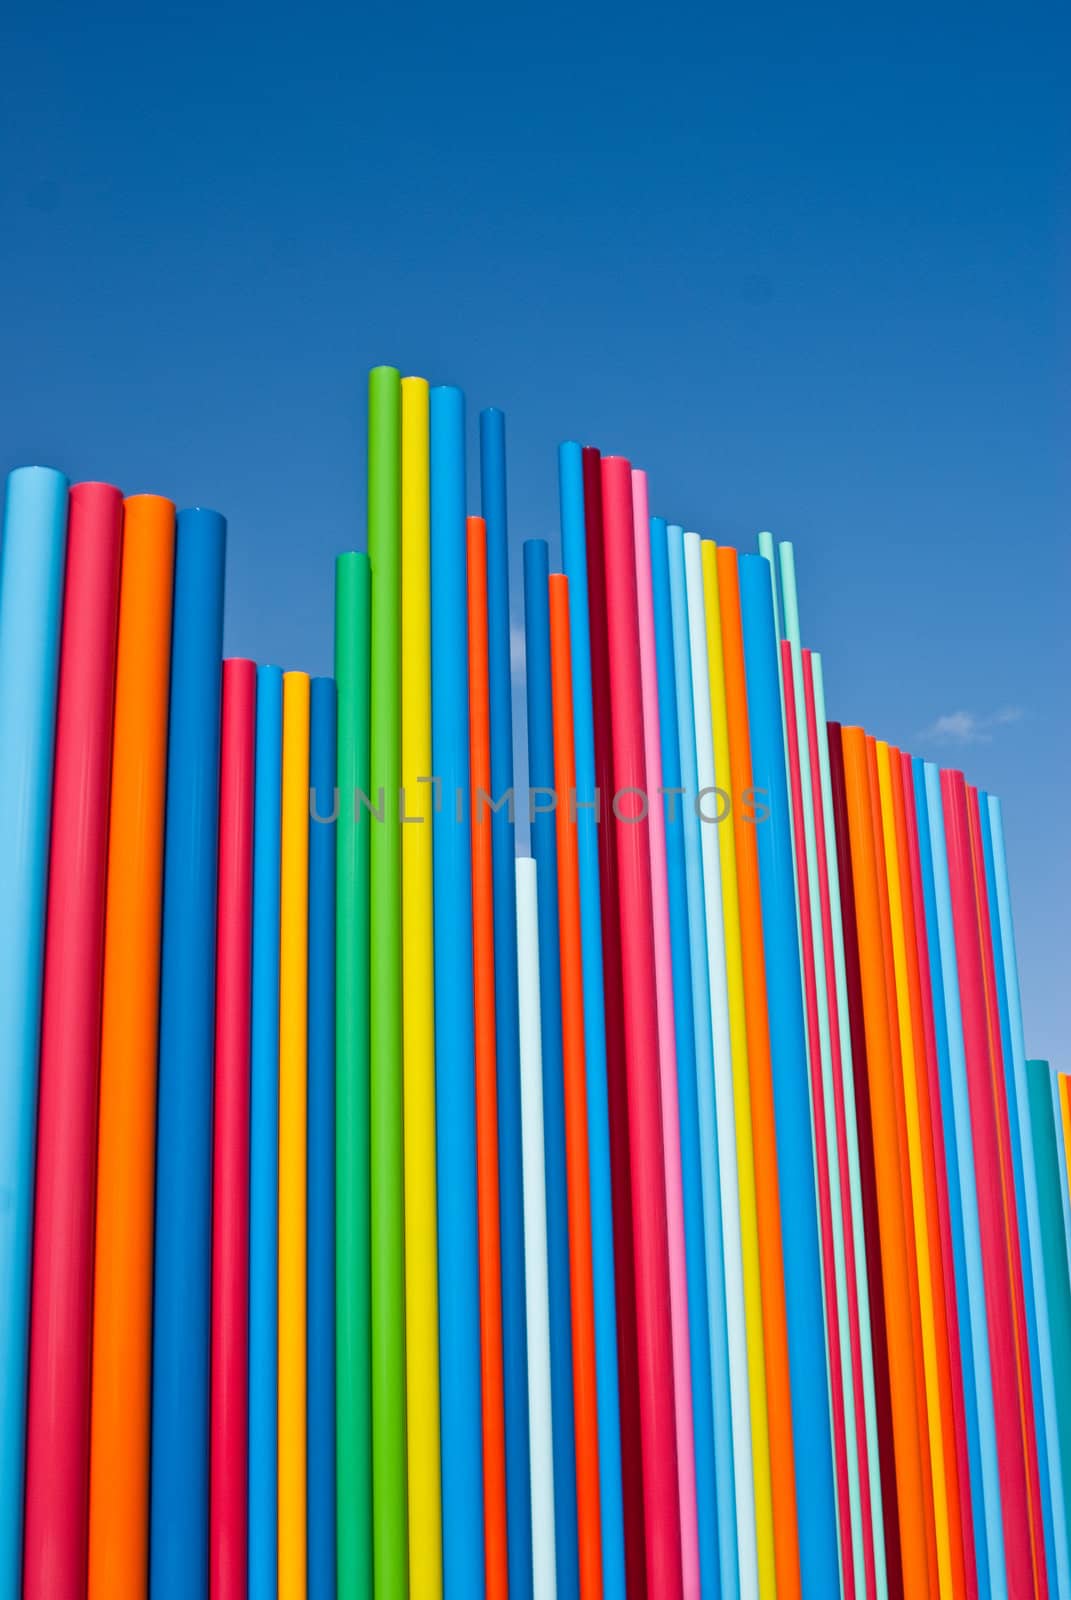 Poles of Primary Colors 3 by emattil